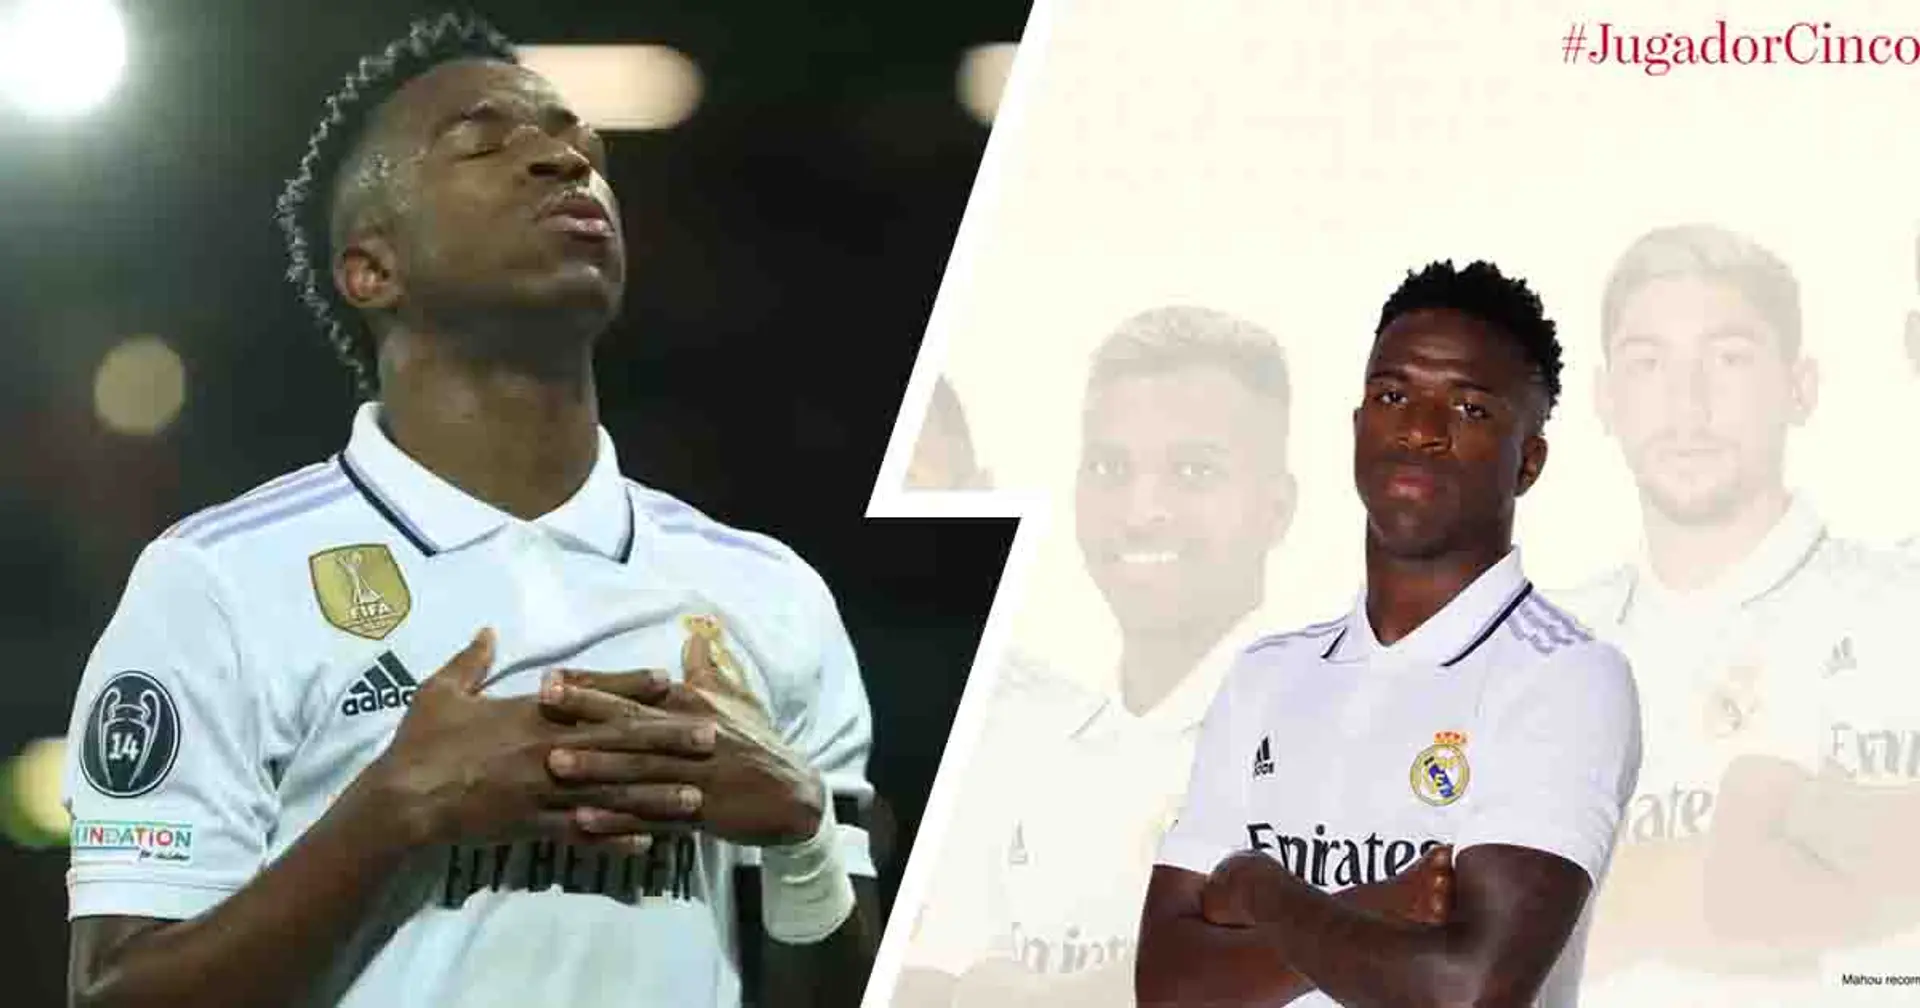 OFFICIAL: Vinicius Jr named as Real Madrid's Player of the Month for February heroics